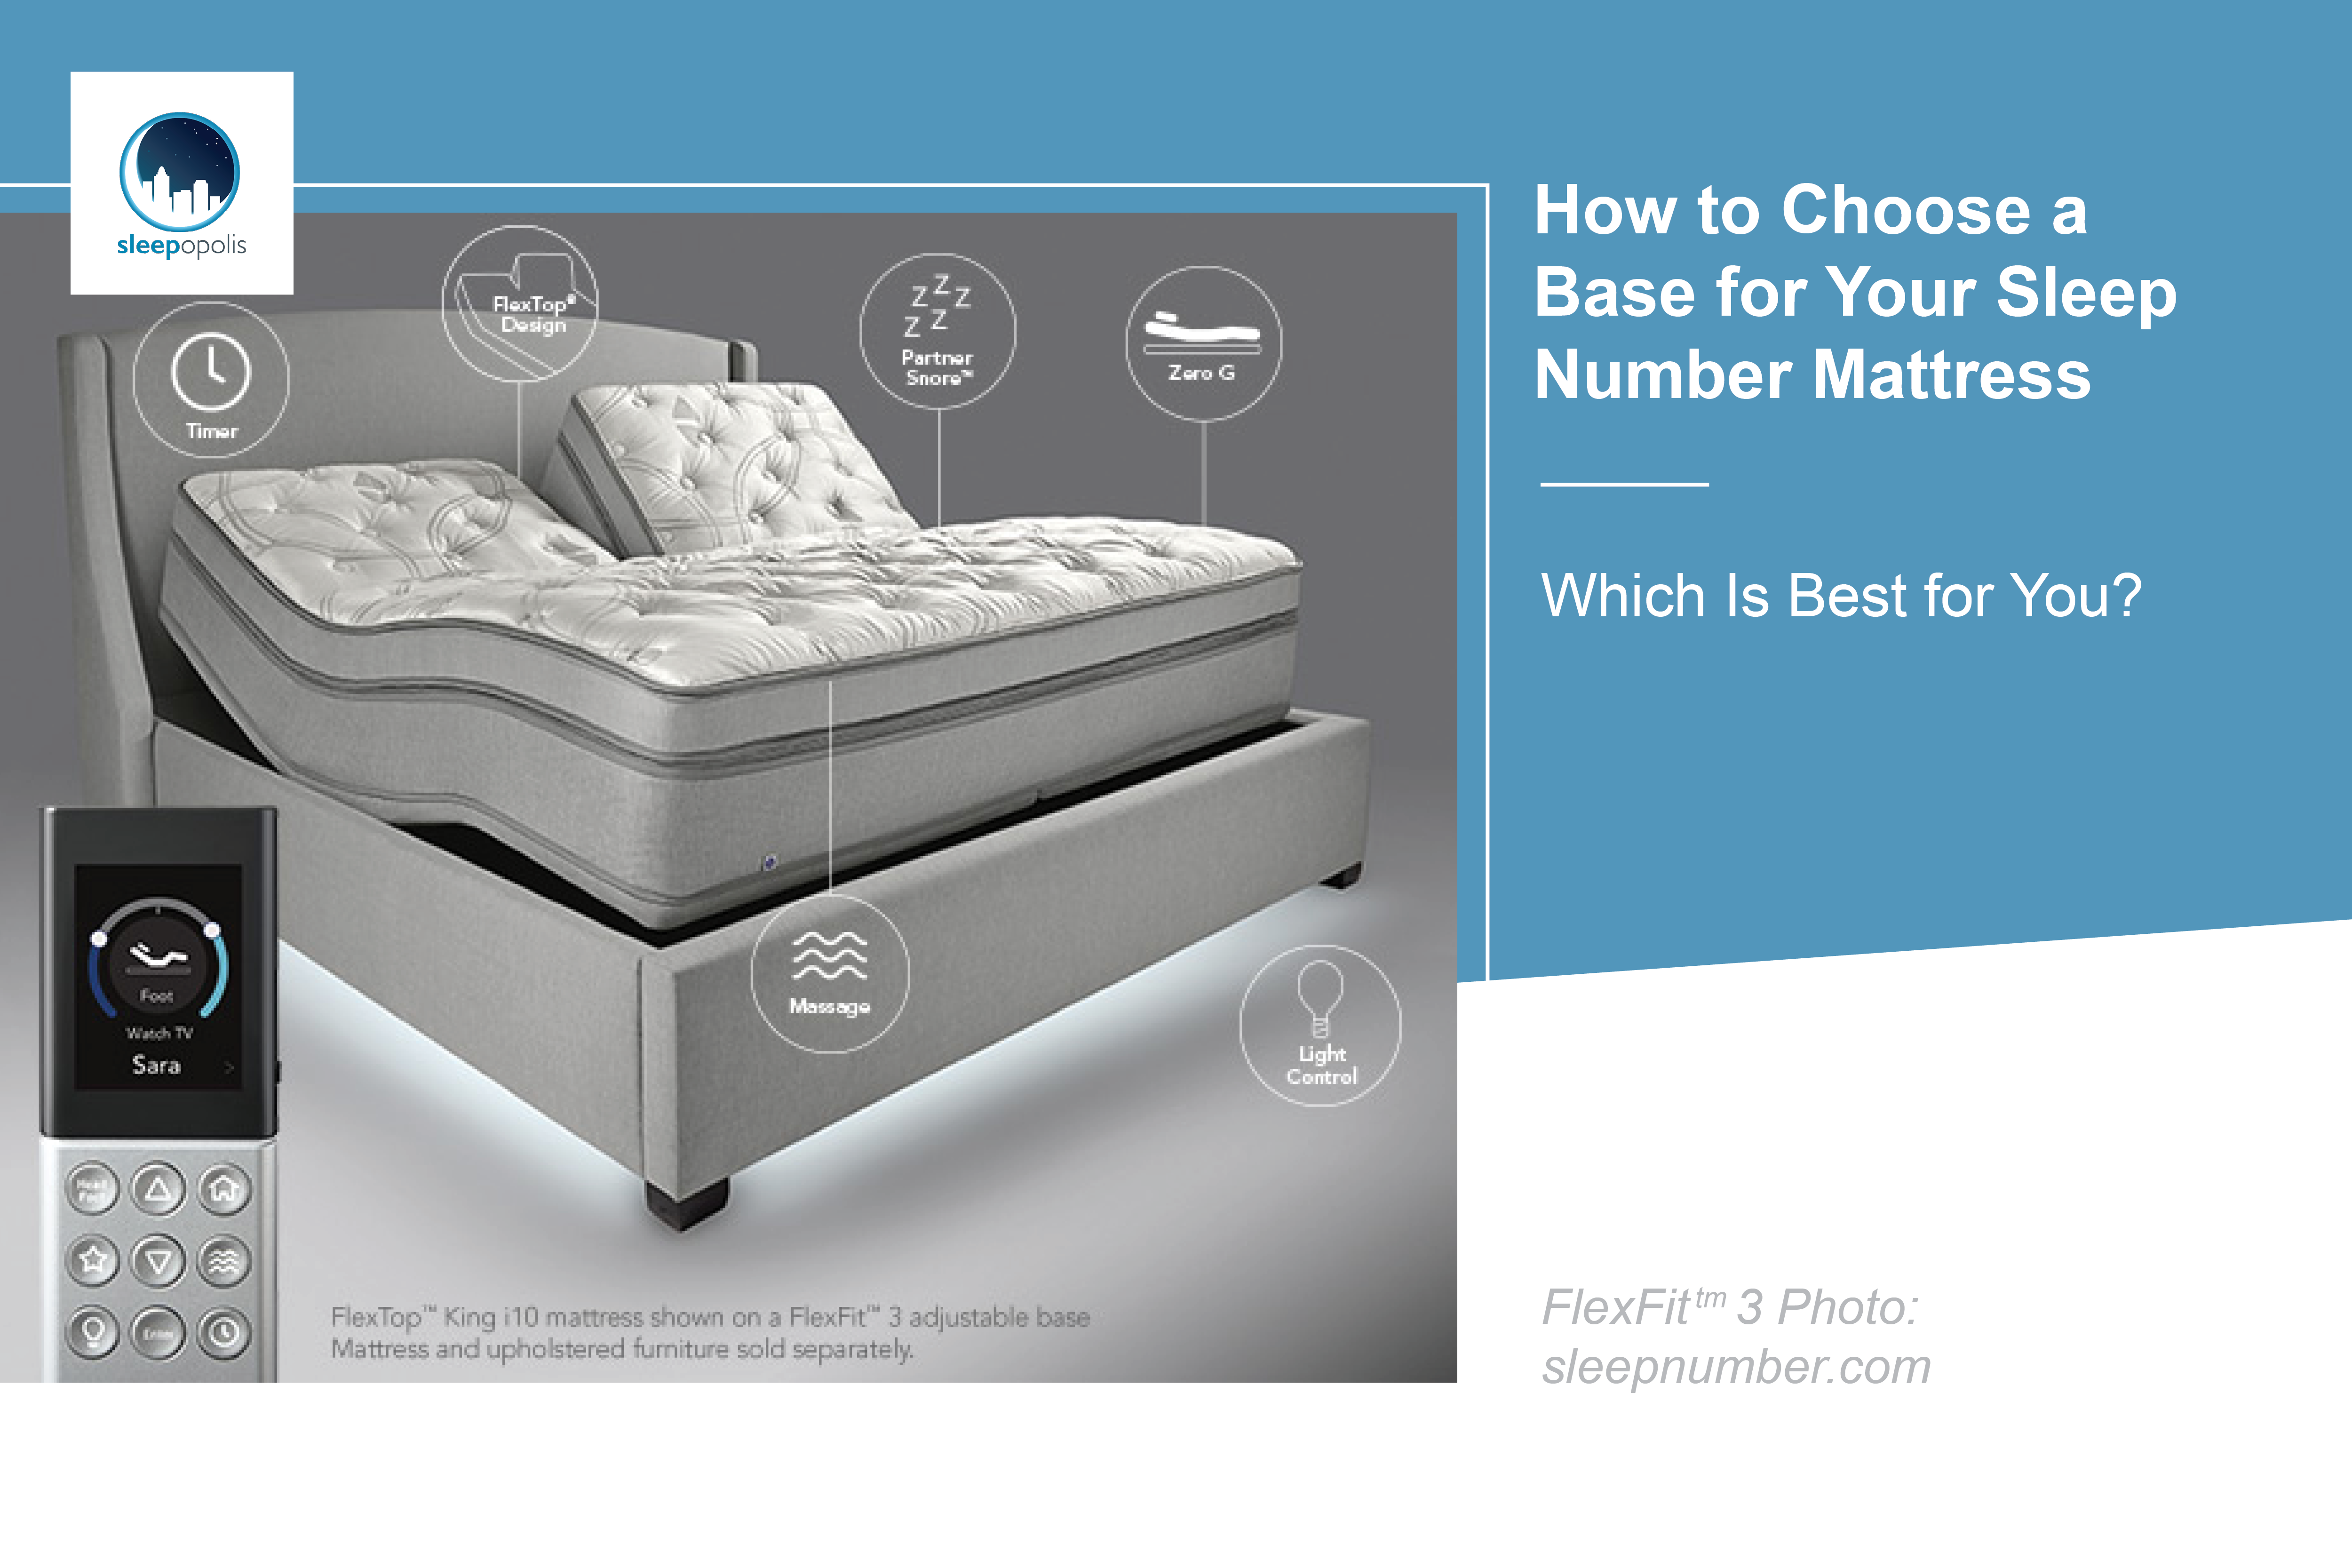 Base For Your Sleep Number Mattress, How To Make A Split King Adjustable Bed